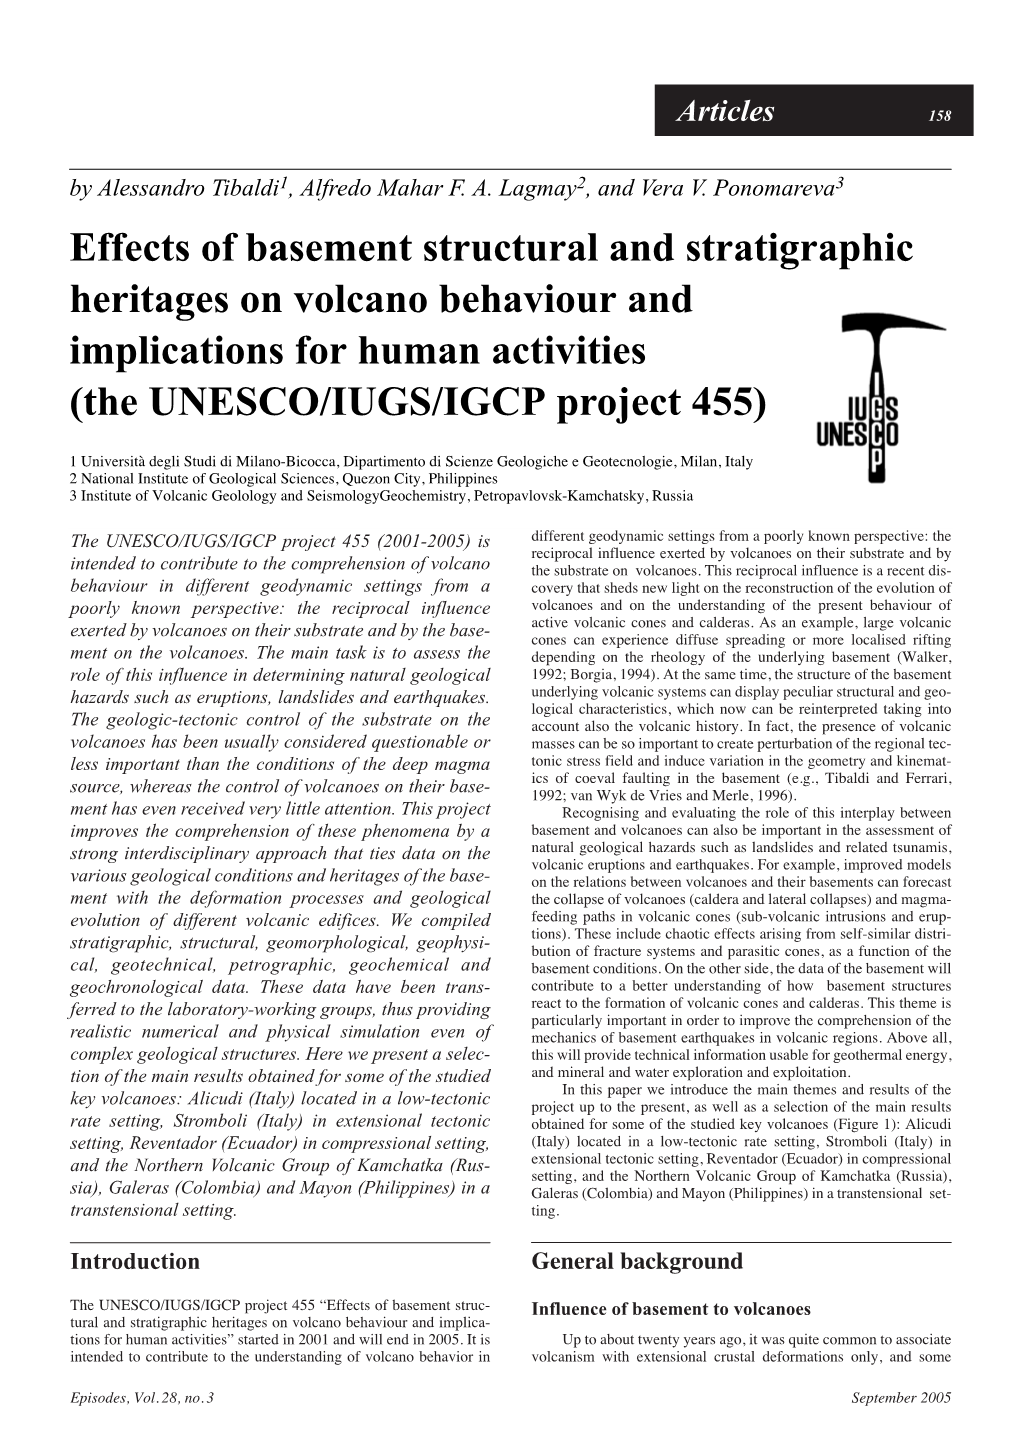 Effects of Basement Structural and Stratigraphic Heritages on Volcano Behaviour and Implications for Human Activities (The UNESCO/IUGS/IGCP Project 455)